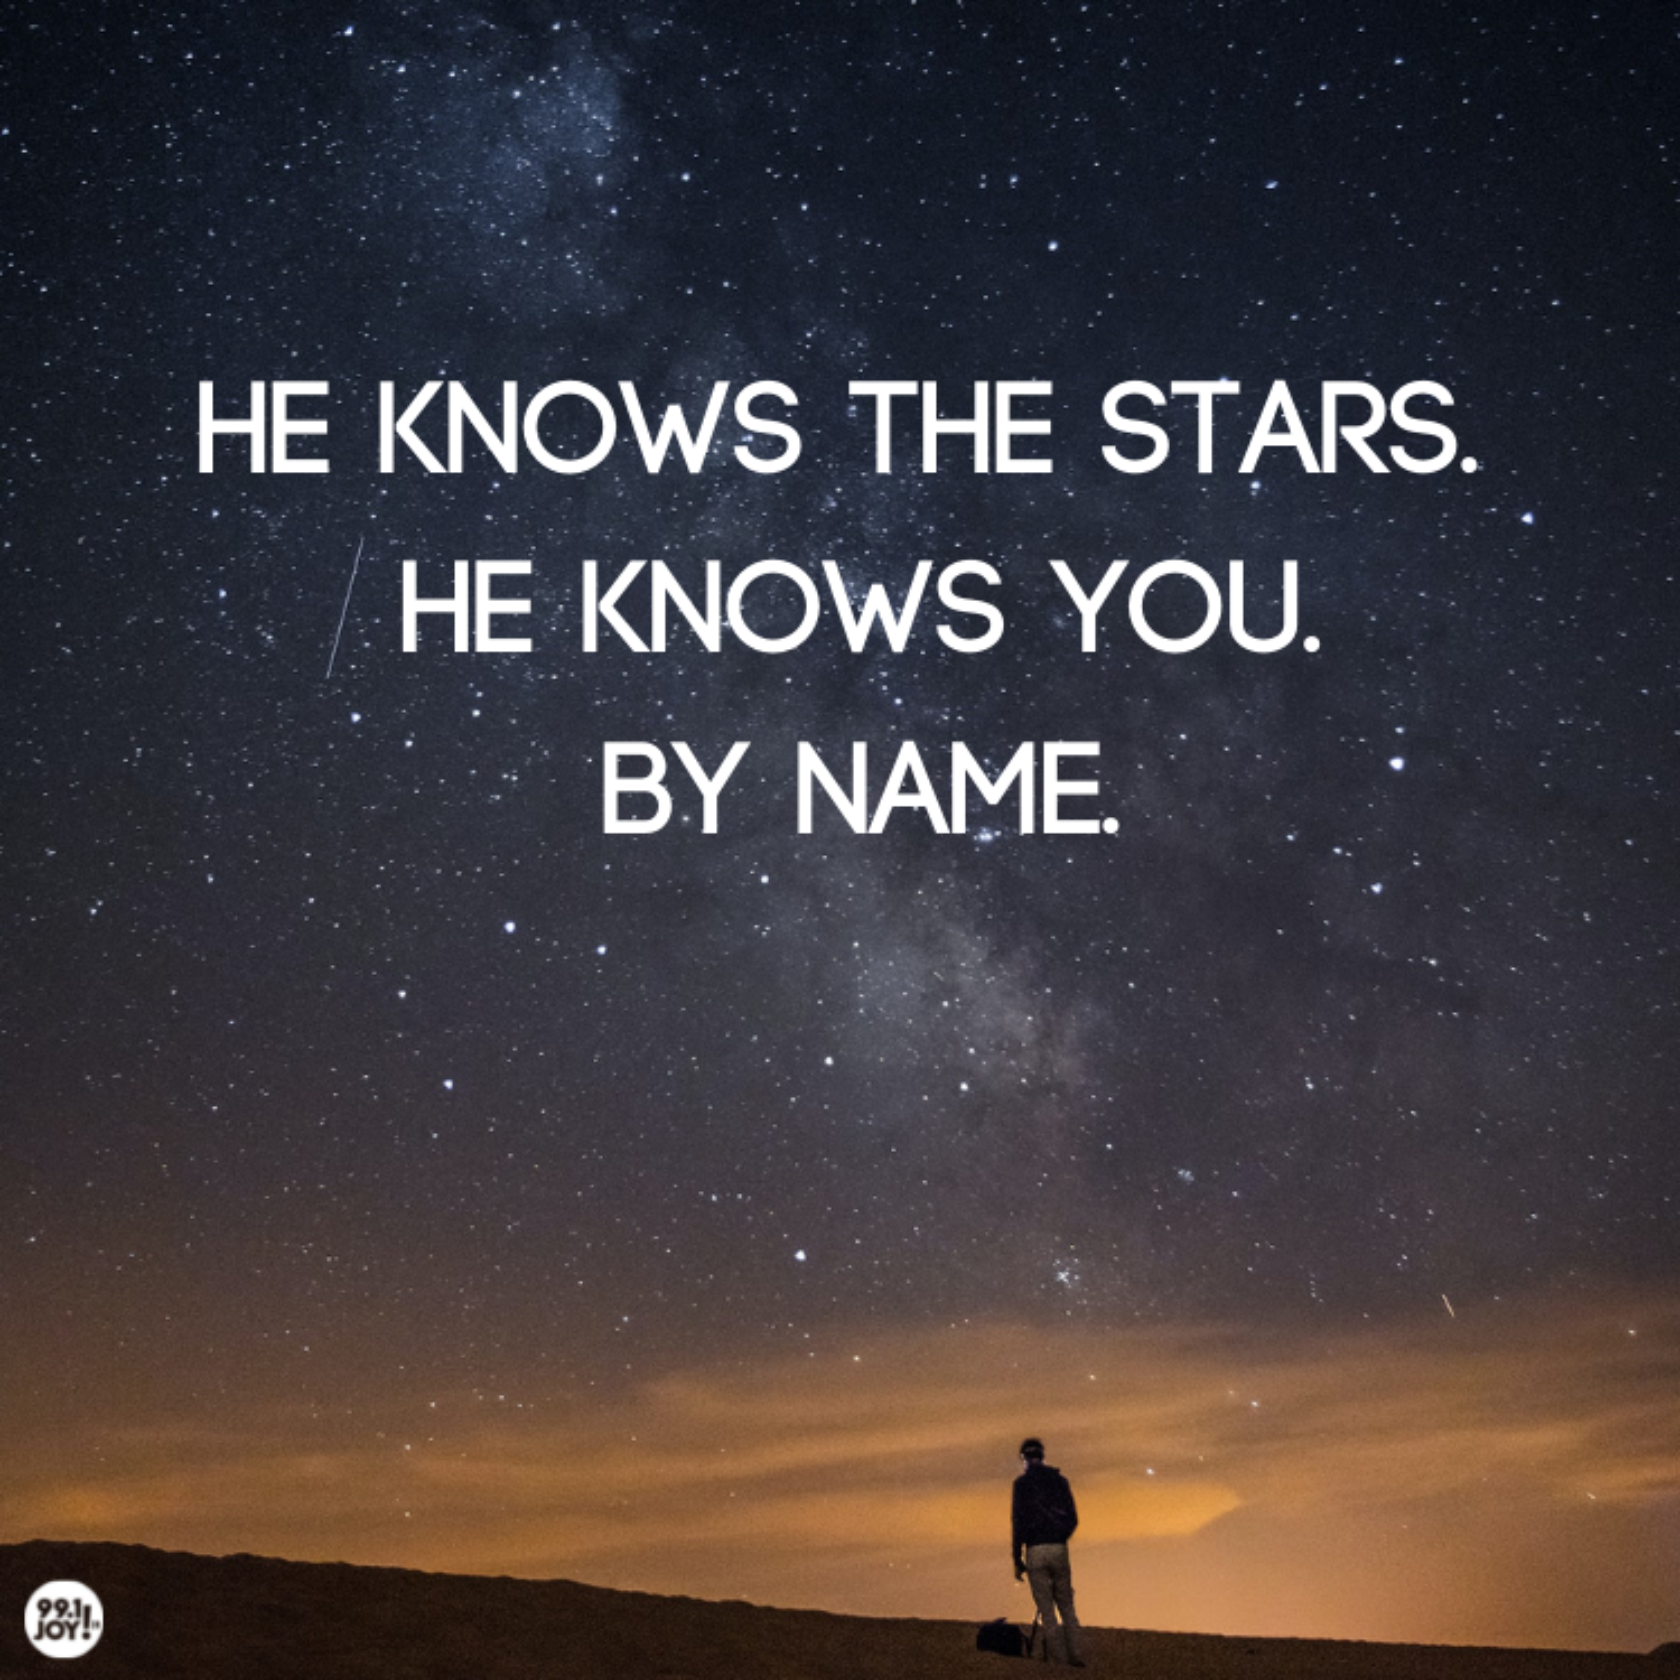 He Knows The Stars. He Knows You. By Name.